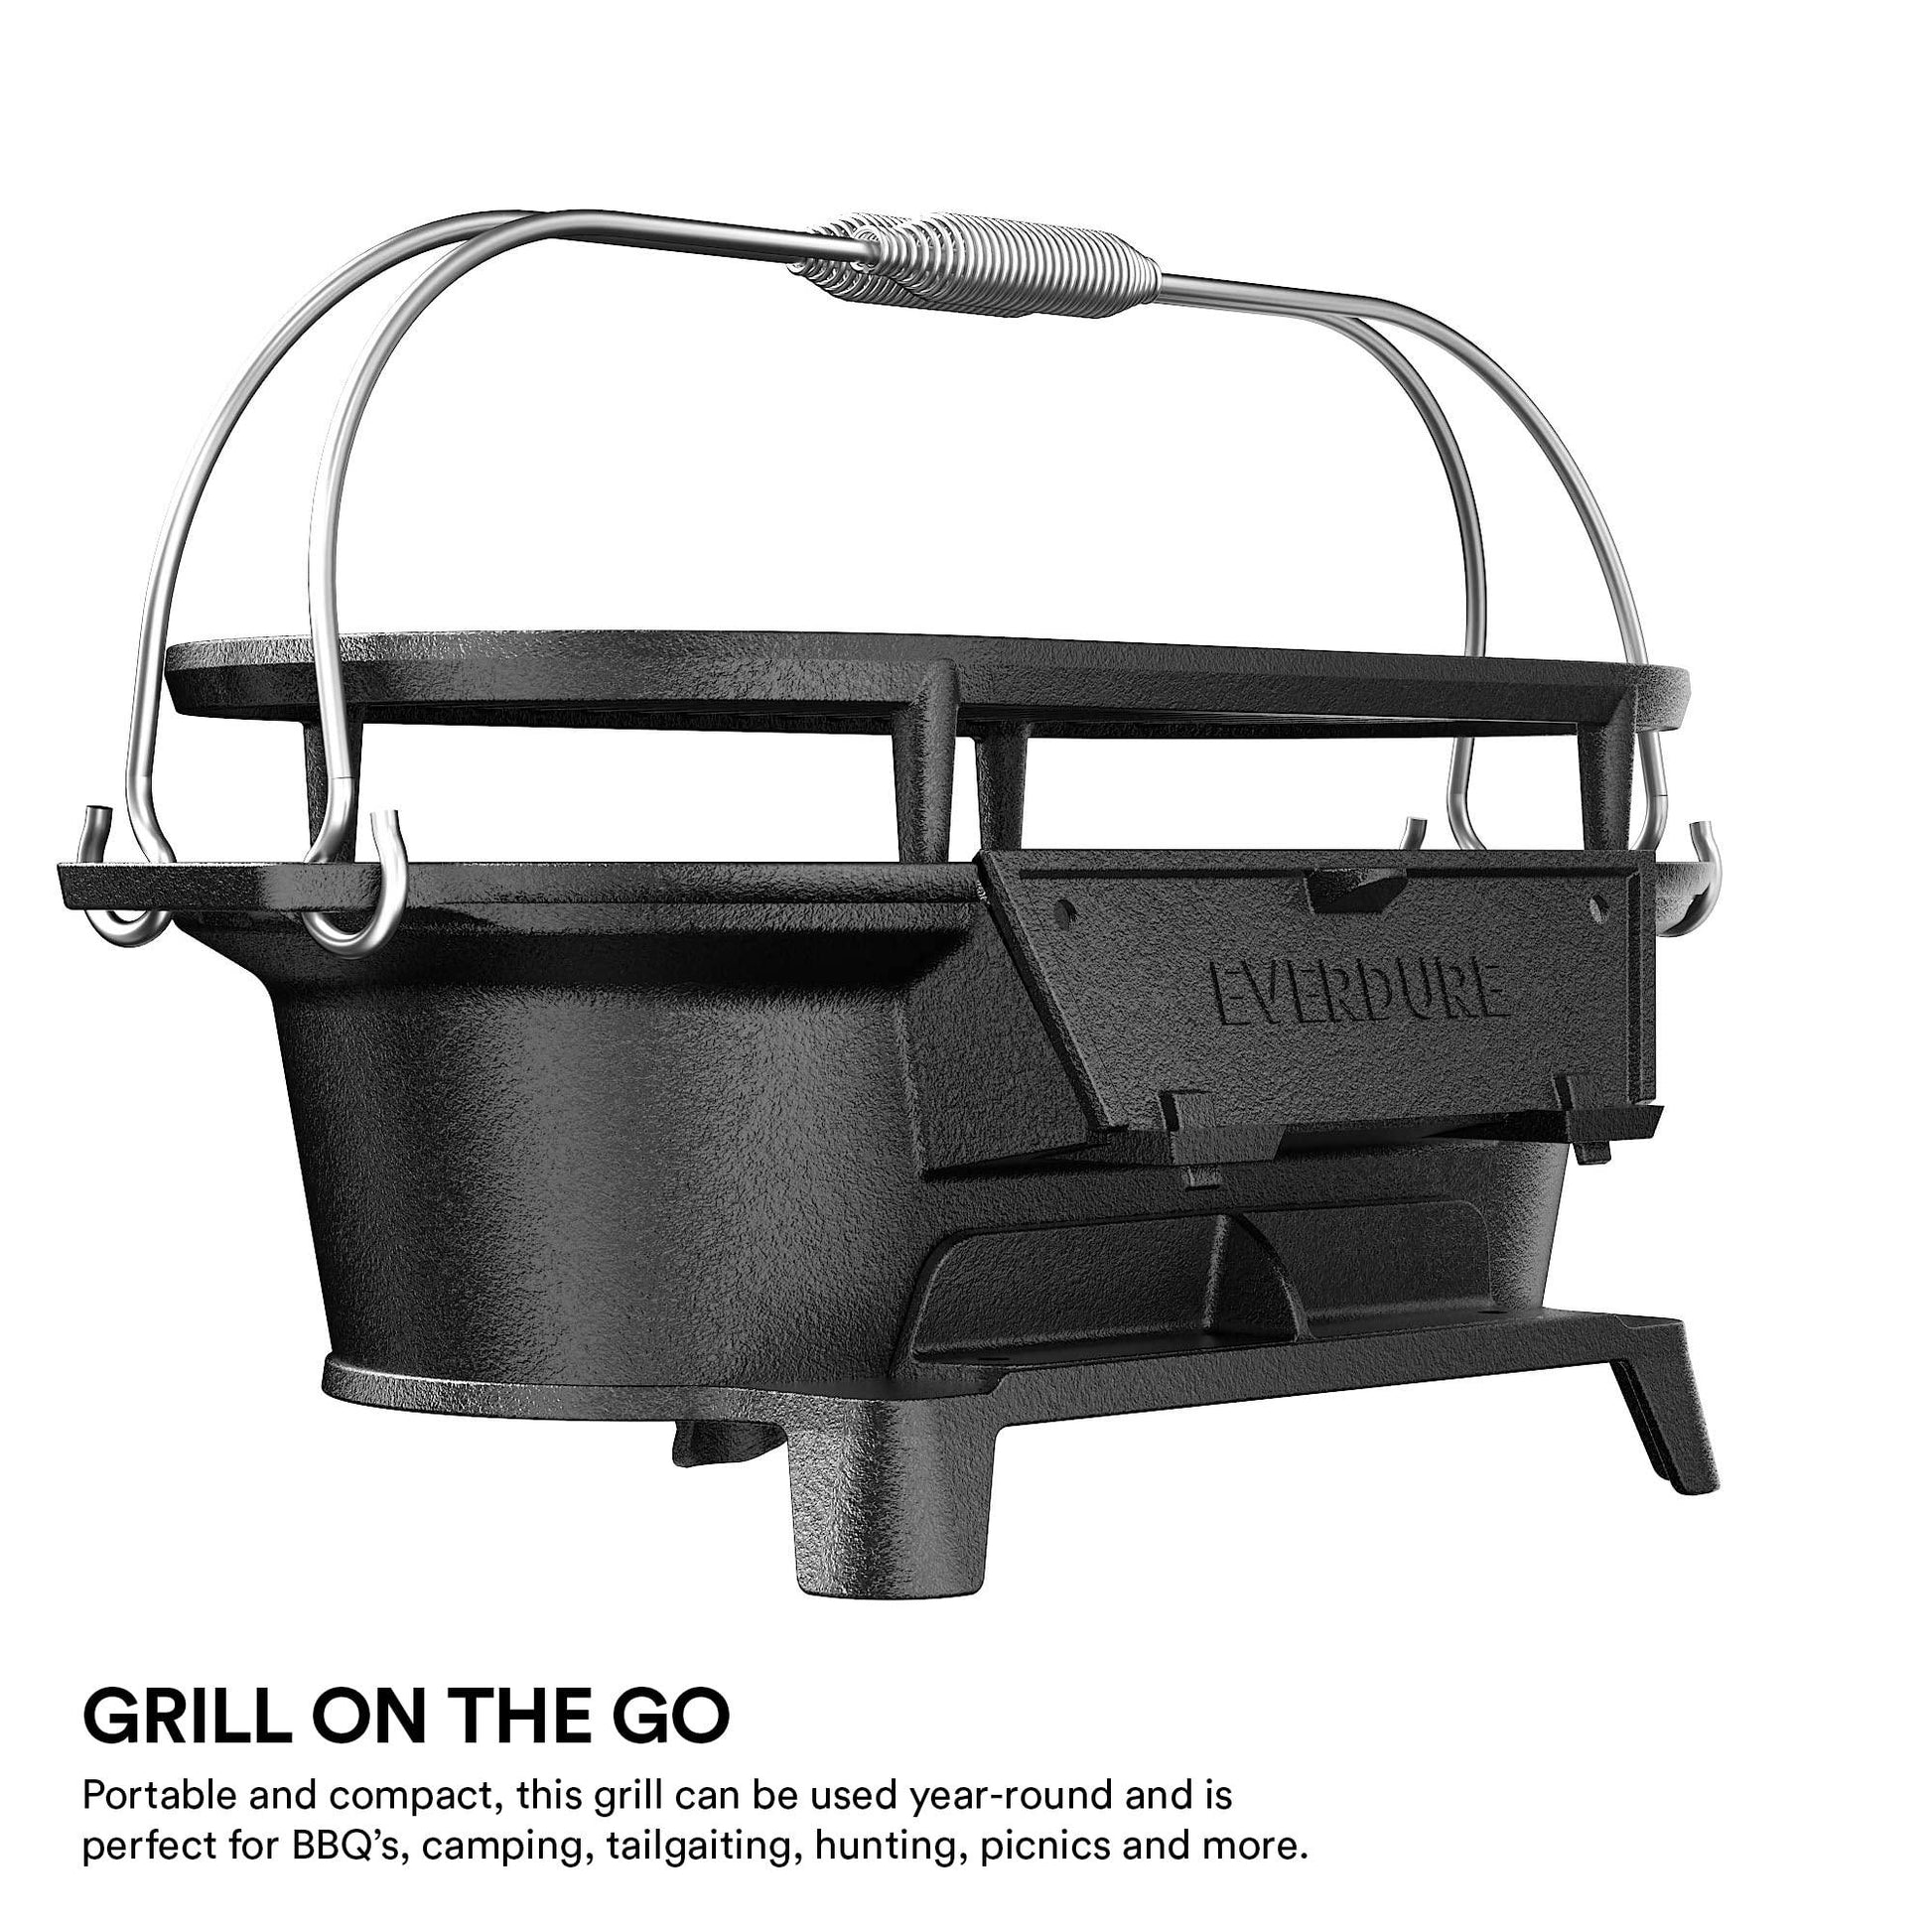 Everdure Oval Cast Iron Grill & Cover – Outdoor, Portable Charcoal Grill and Tabletop Cast Iron Skillet - 100% Cast Iron, Enameled, Durable, Small Charcoal Grill, Camping Stove, Hibachi Grill - CookCave